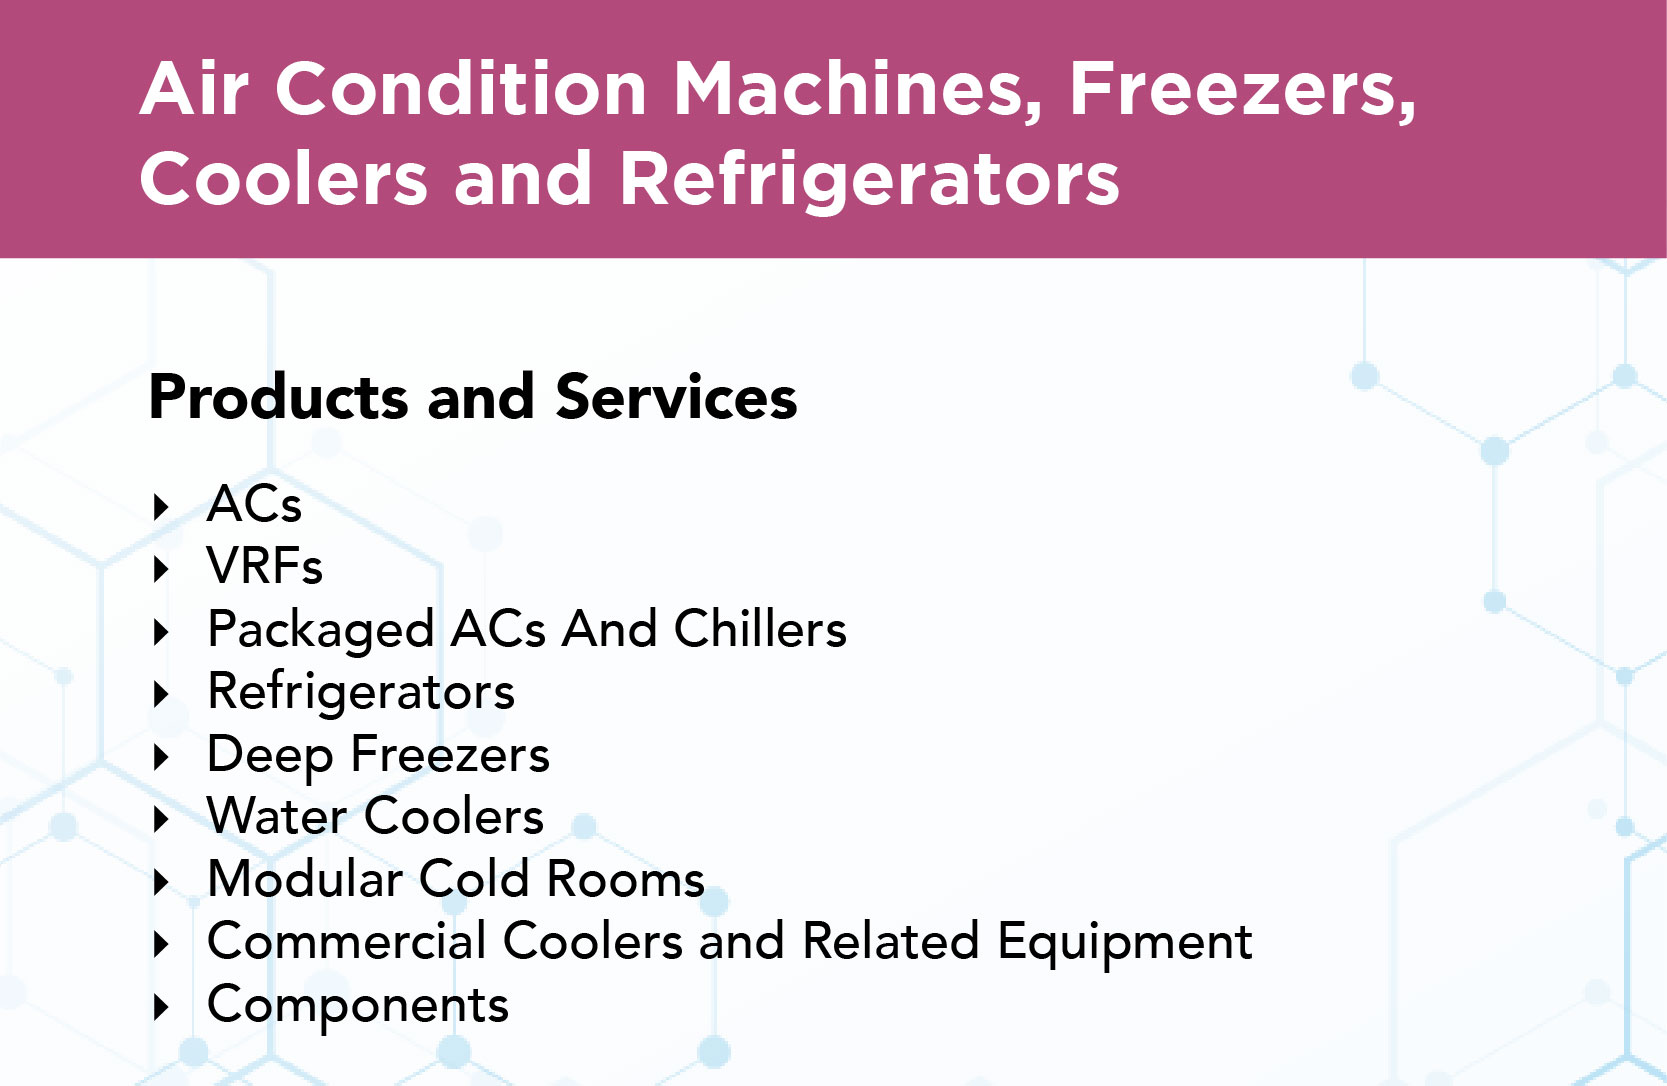 Air Condition Machines, Freezers, Coolers and Refrigerators